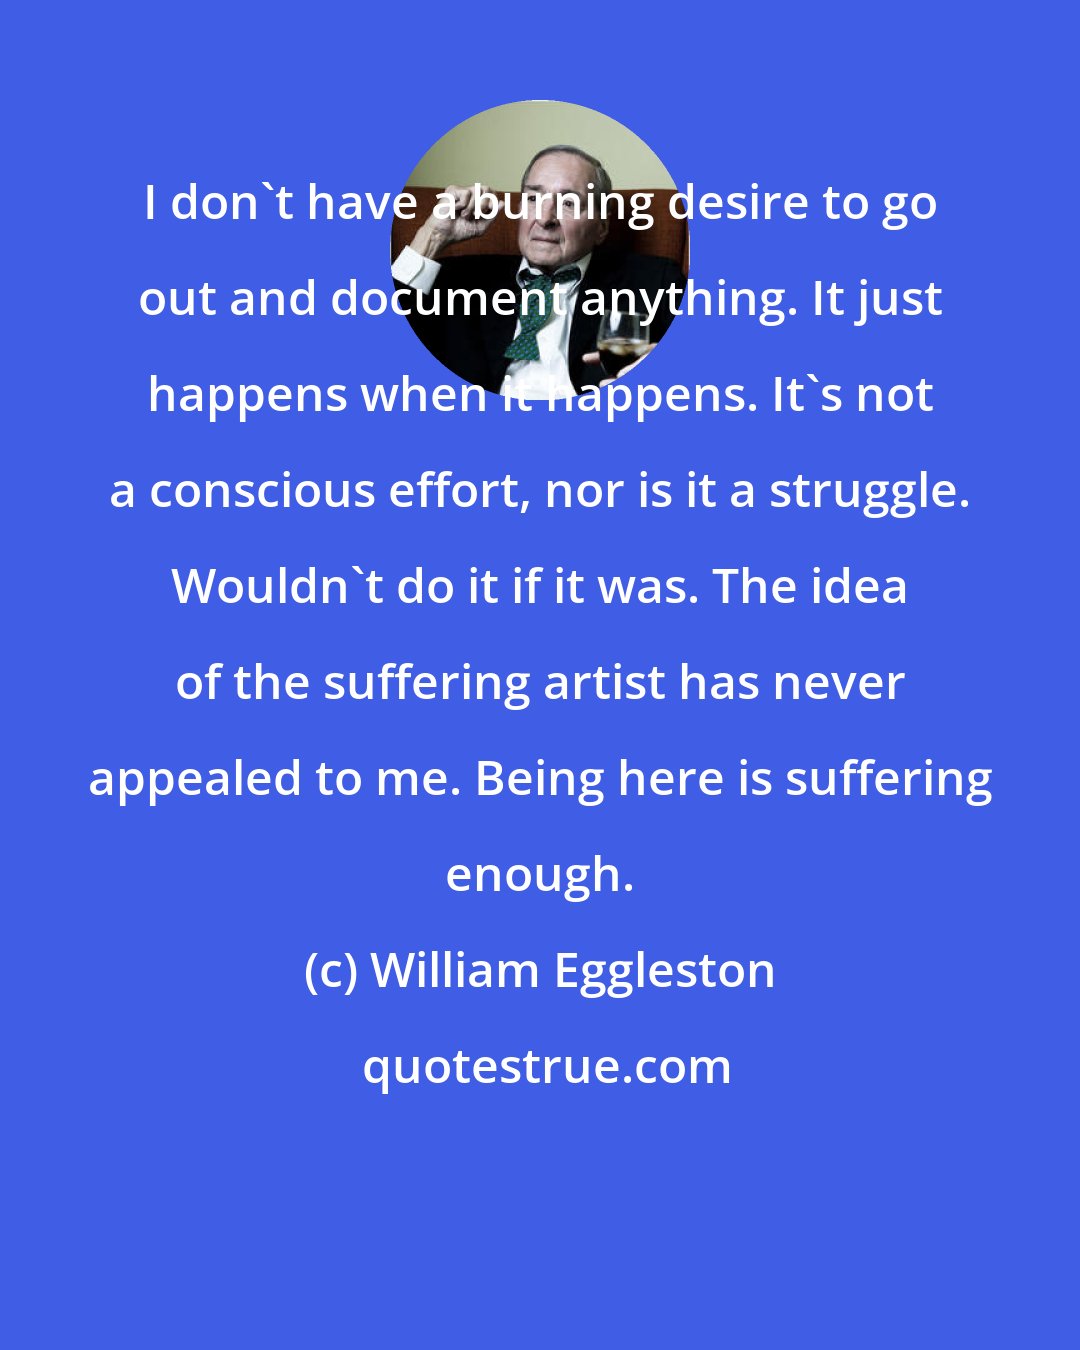 William Eggleston: I don't have a burning desire to go out and document anything. It just happens when it happens. It's not a conscious effort, nor is it a struggle. Wouldn't do it if it was. The idea of the suffering artist has never appealed to me. Being here is suffering enough.